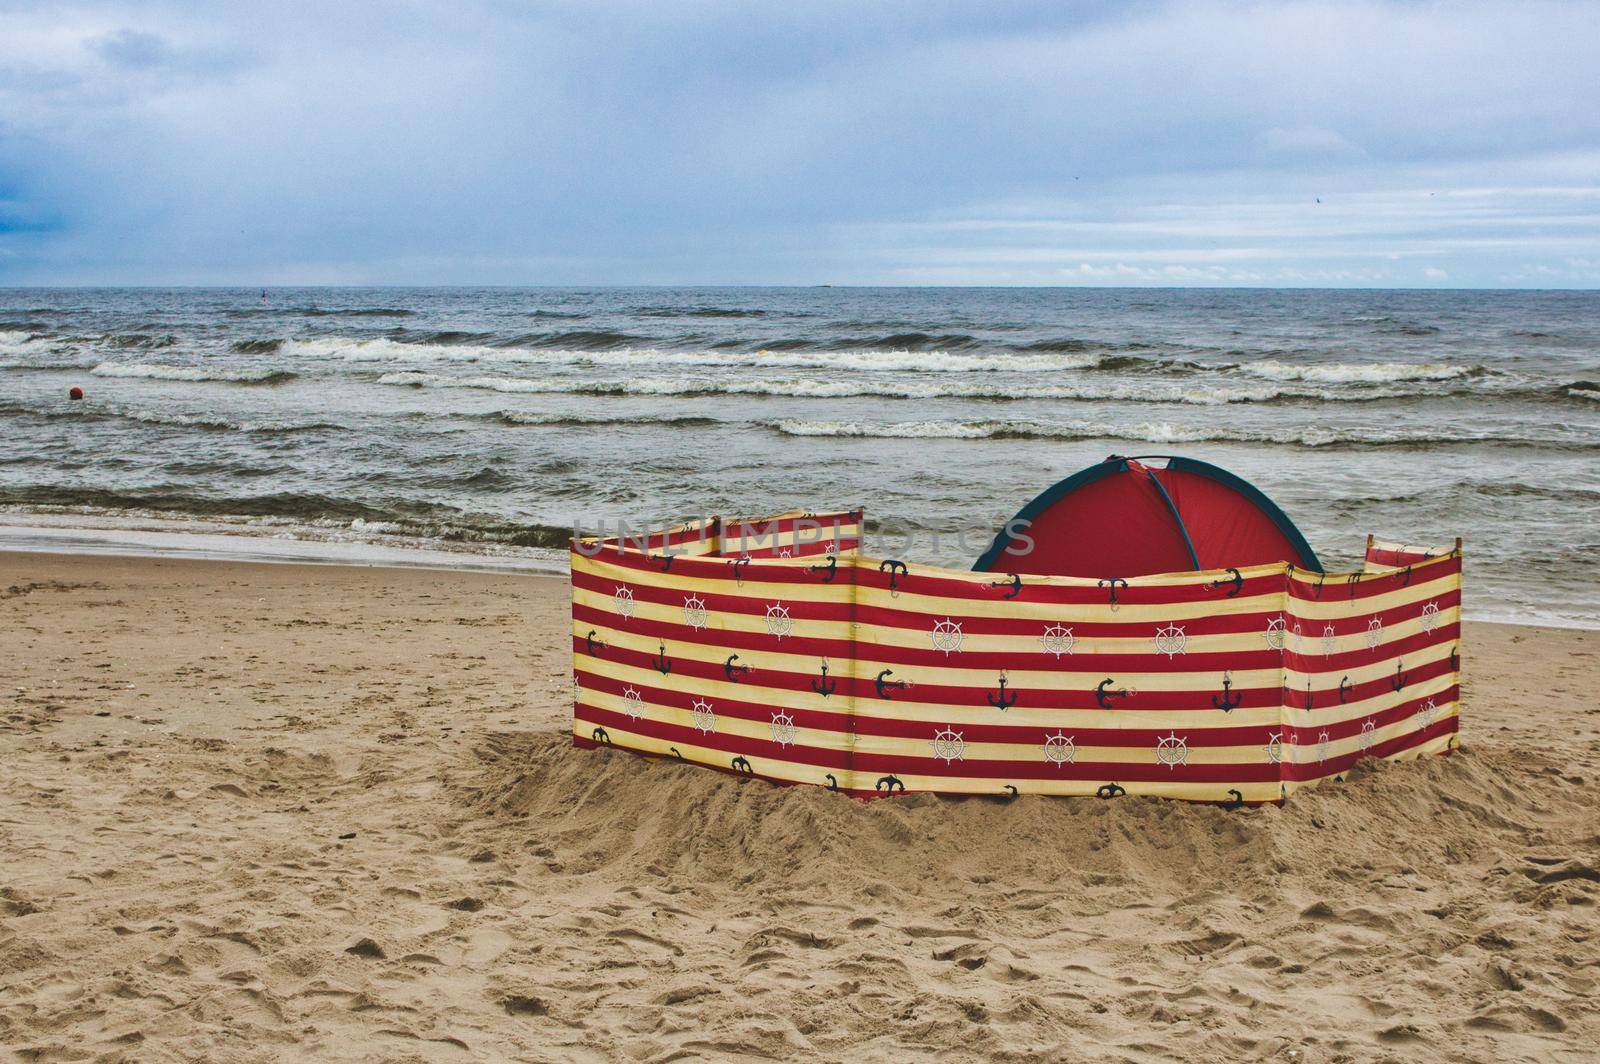 A wind-breaker and tent on the sand at the beach